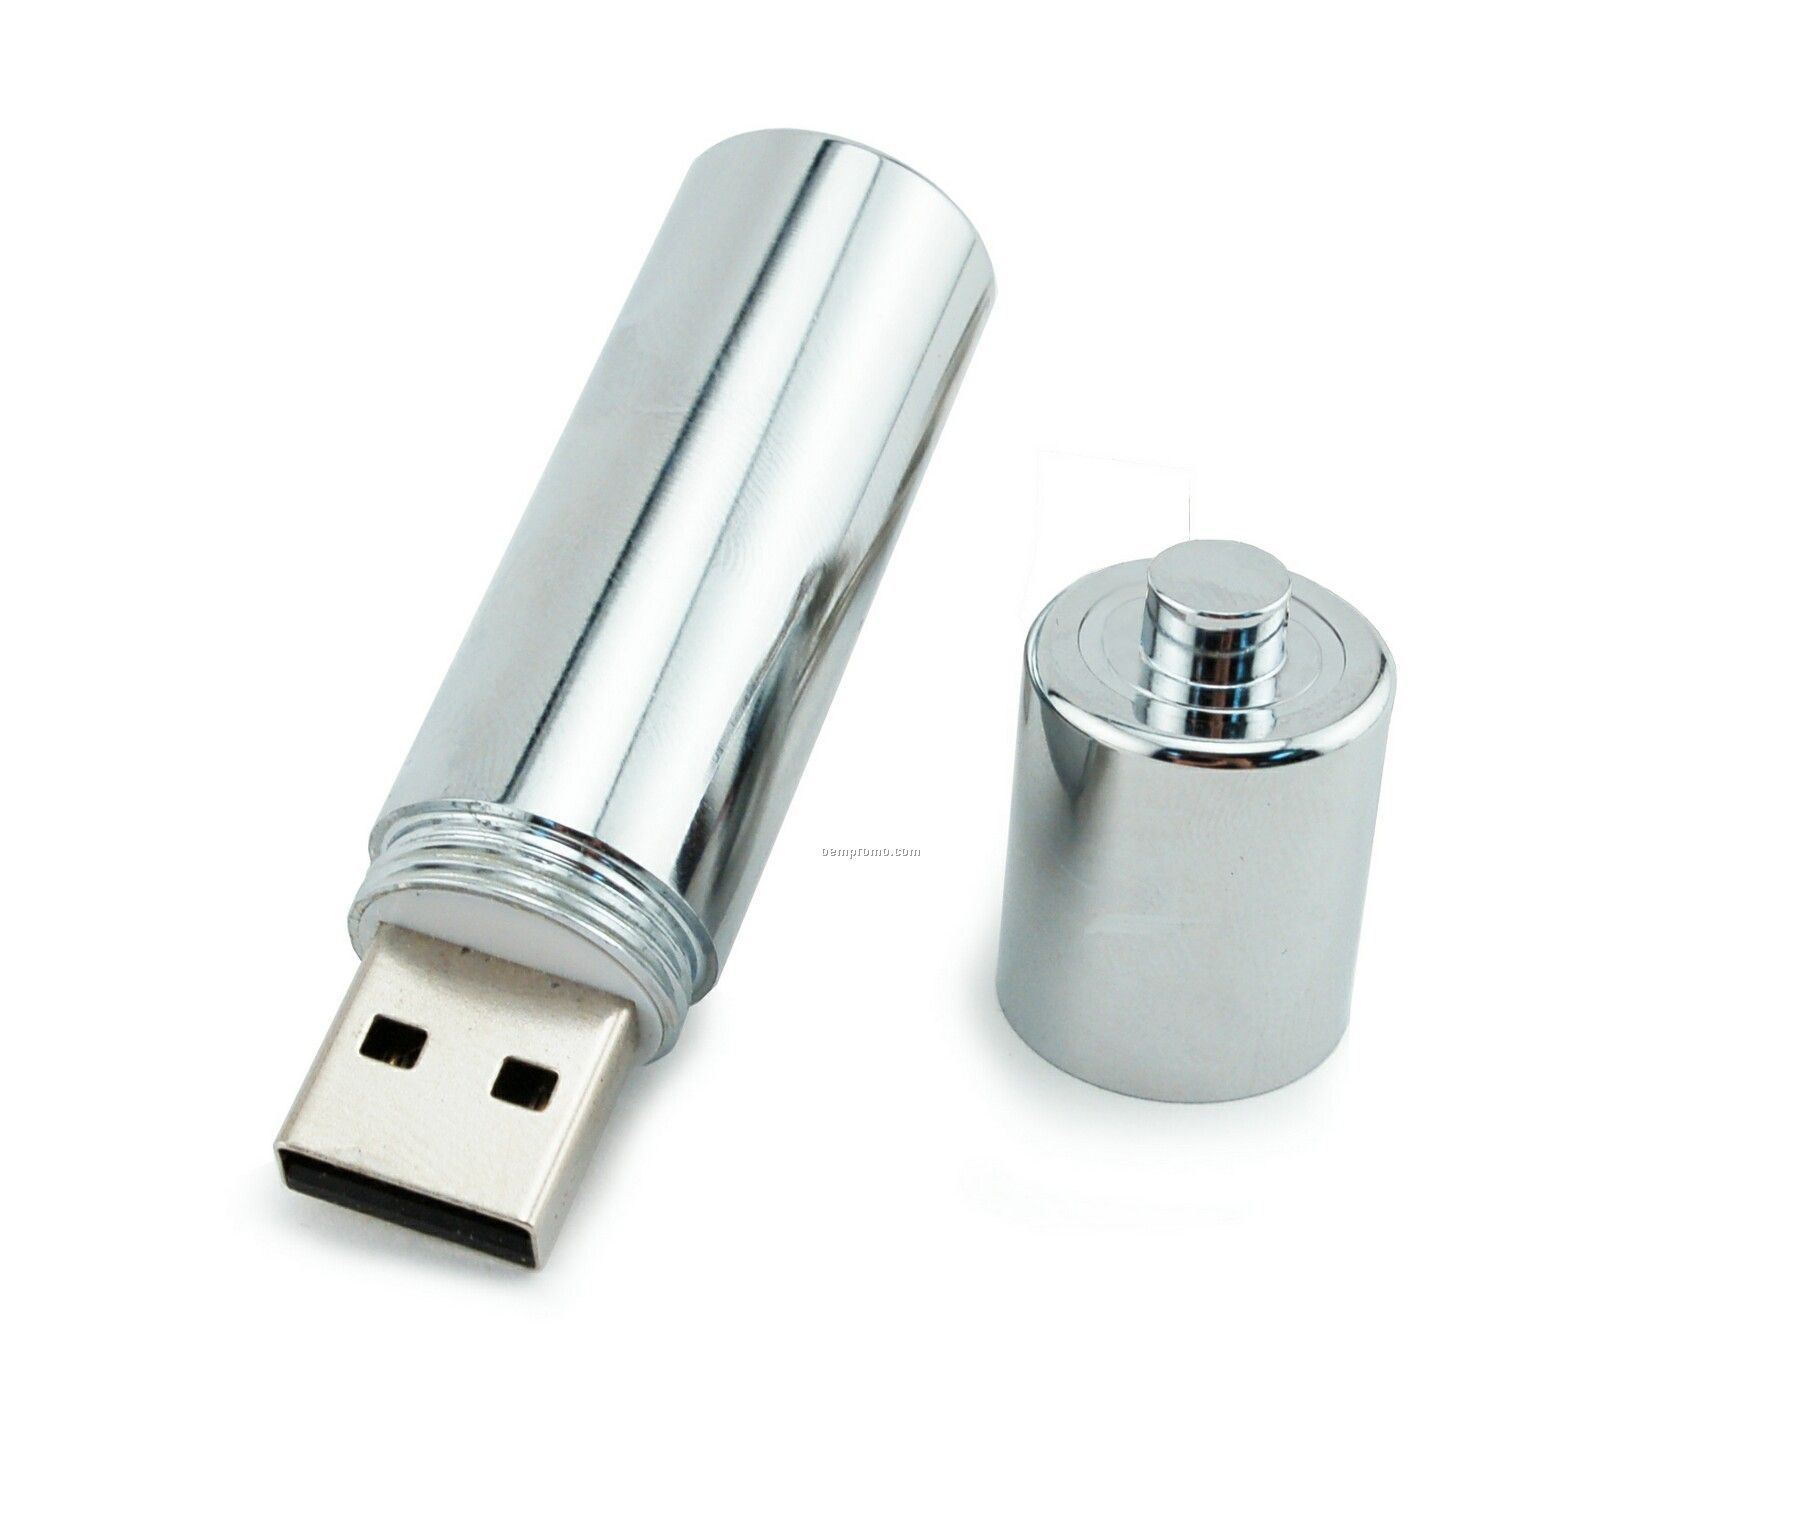 2 Gb Specialty USB Drive - Battery